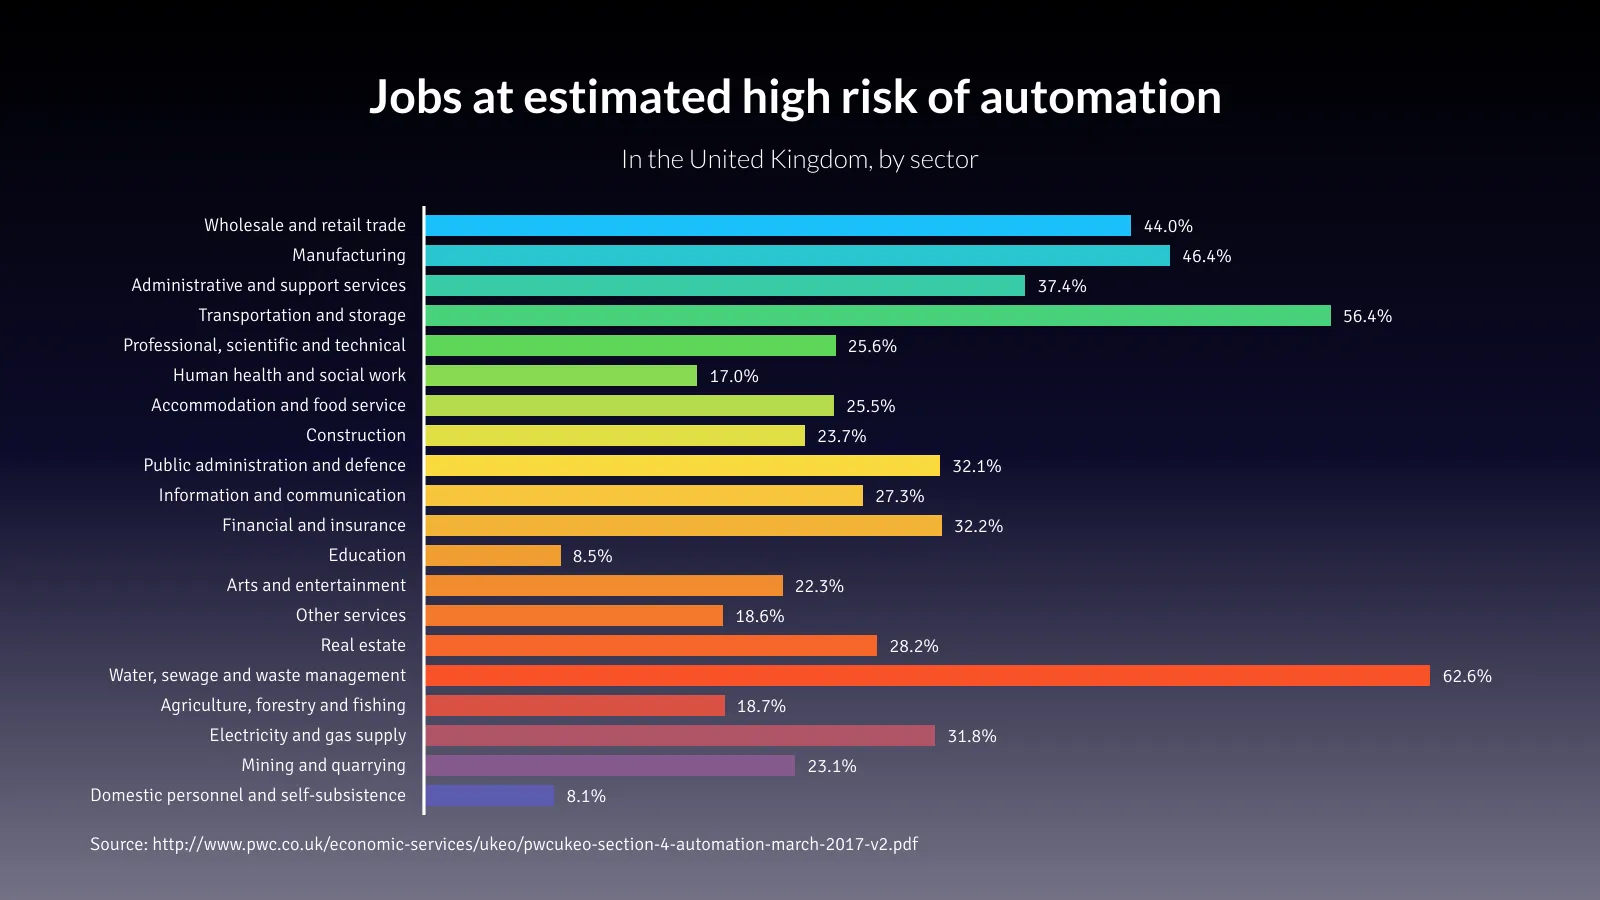 Bar Chart example: Jobs at estimated high risk of automation